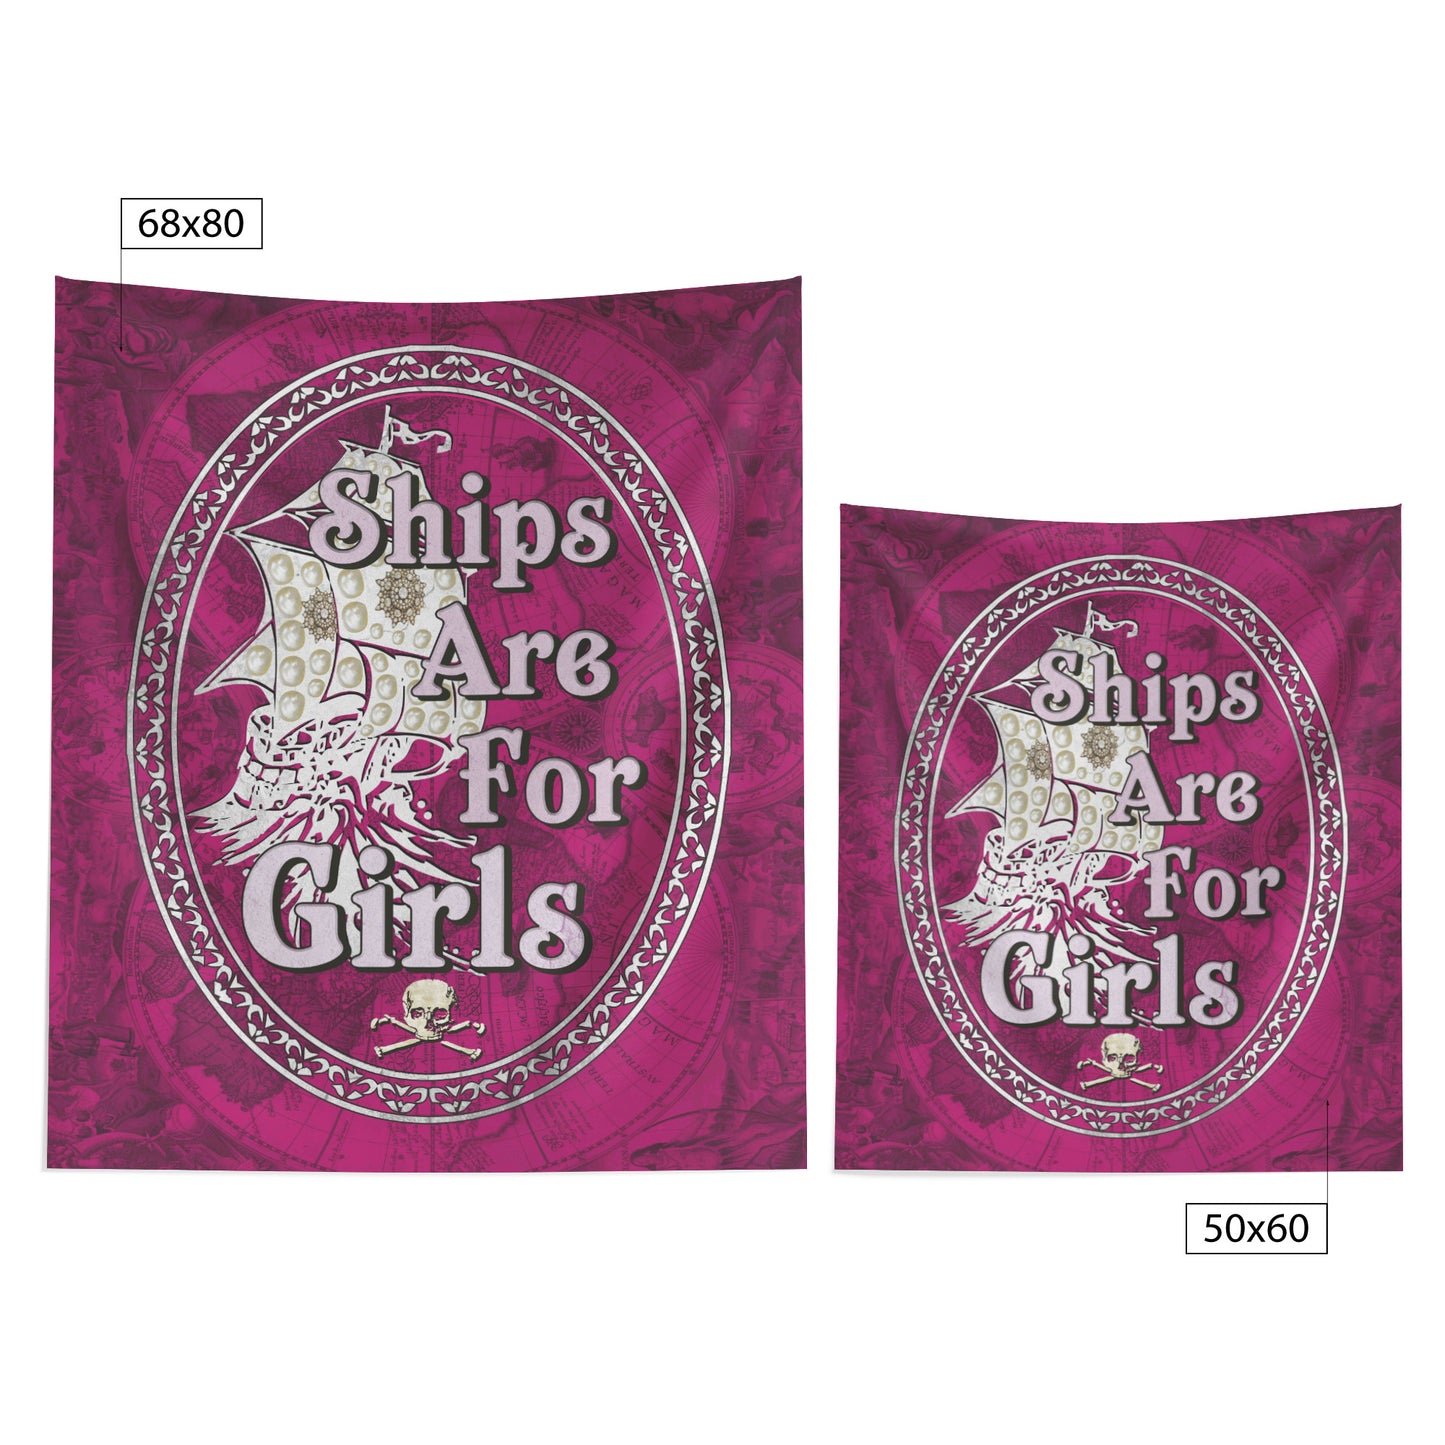 Ships Are For Girls Wall Hanging